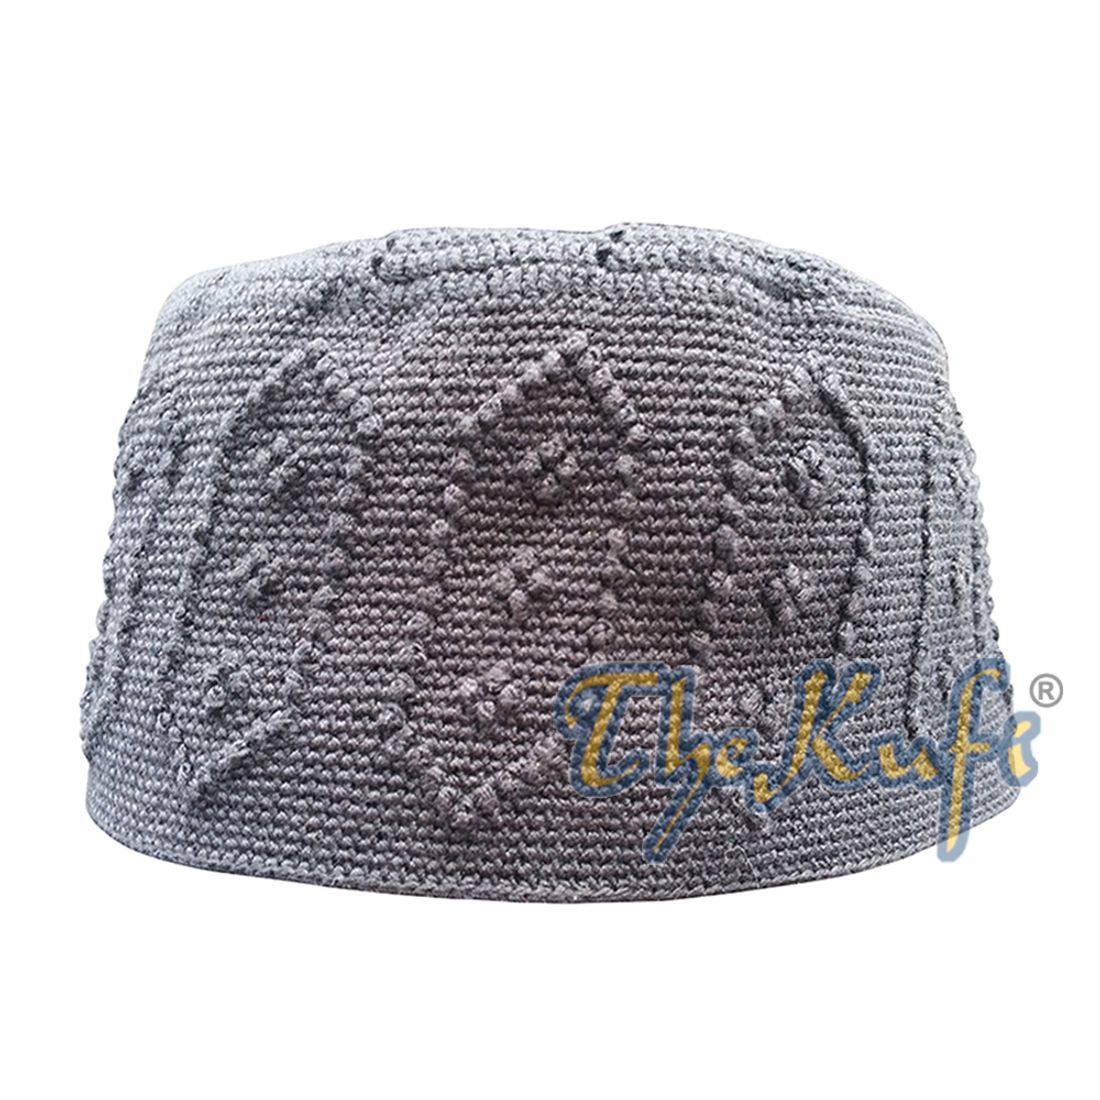 Black Open Weave Top with Knot Hand crochet Kufi Hat